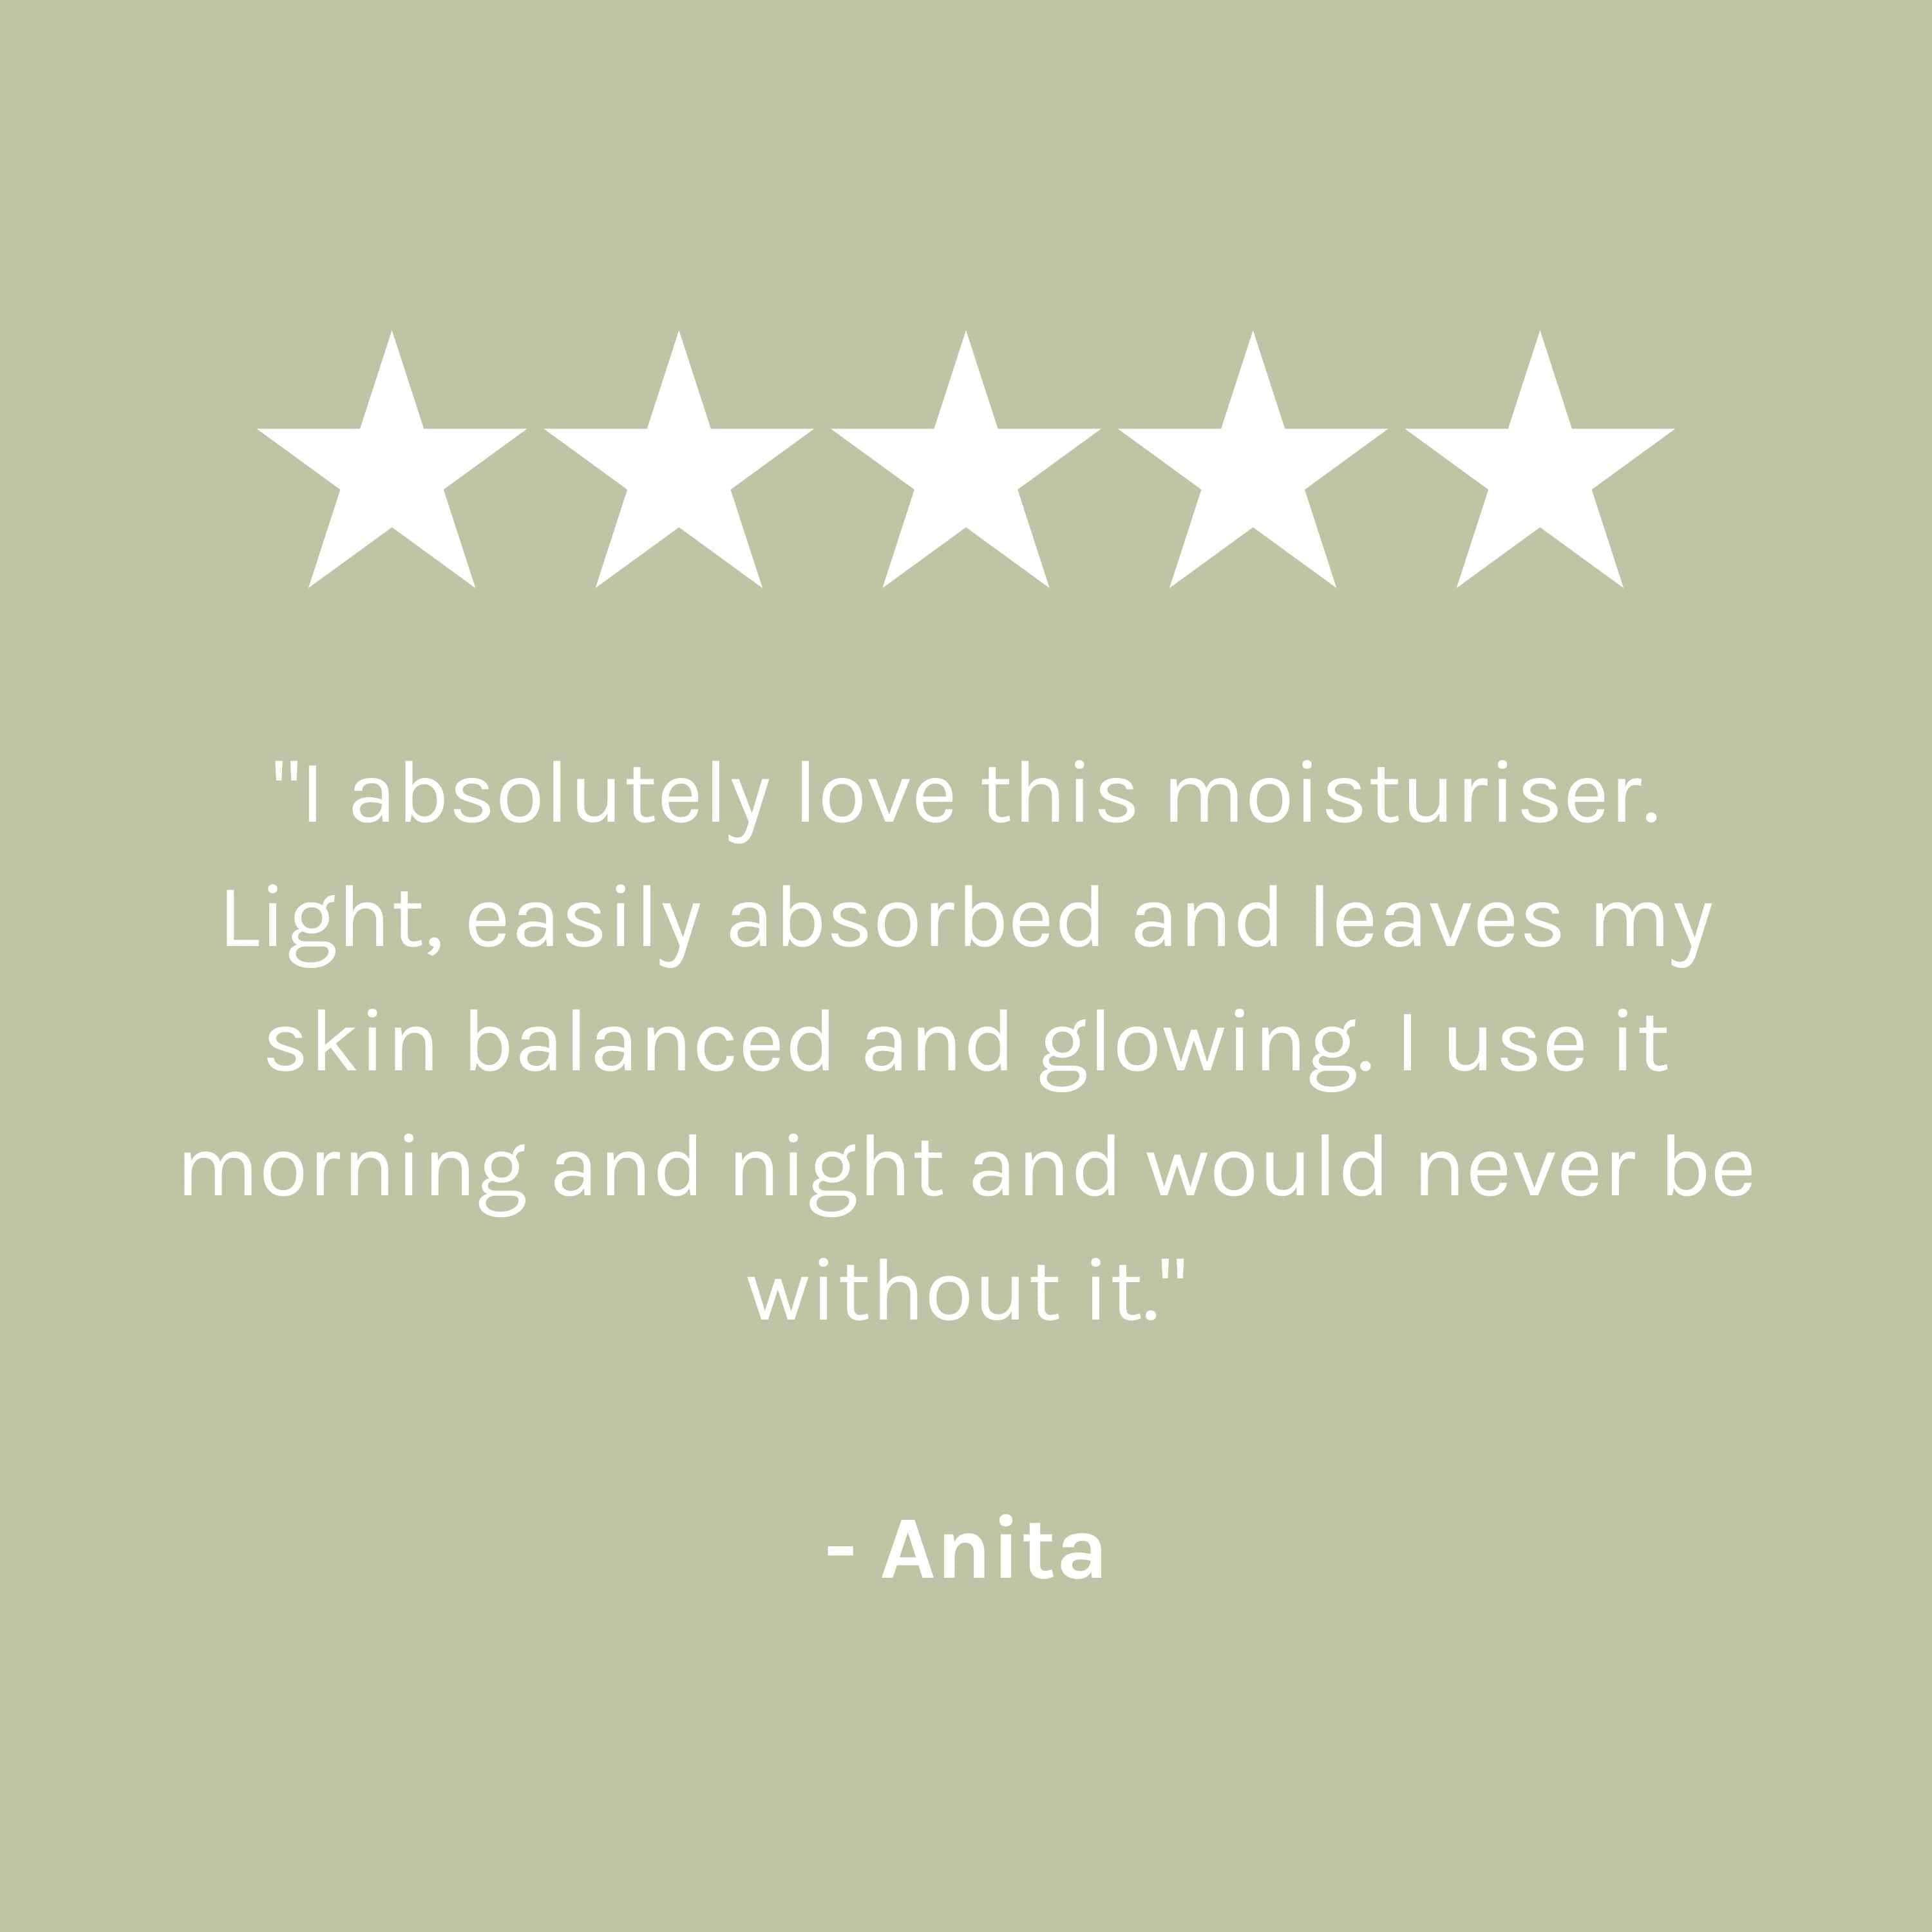 &quot;I absolutely love this moisturiser. Light, easily absorbed and leaves my skin balanced and glowing. I use it morning and night and would never be without it.&quot; - Anita